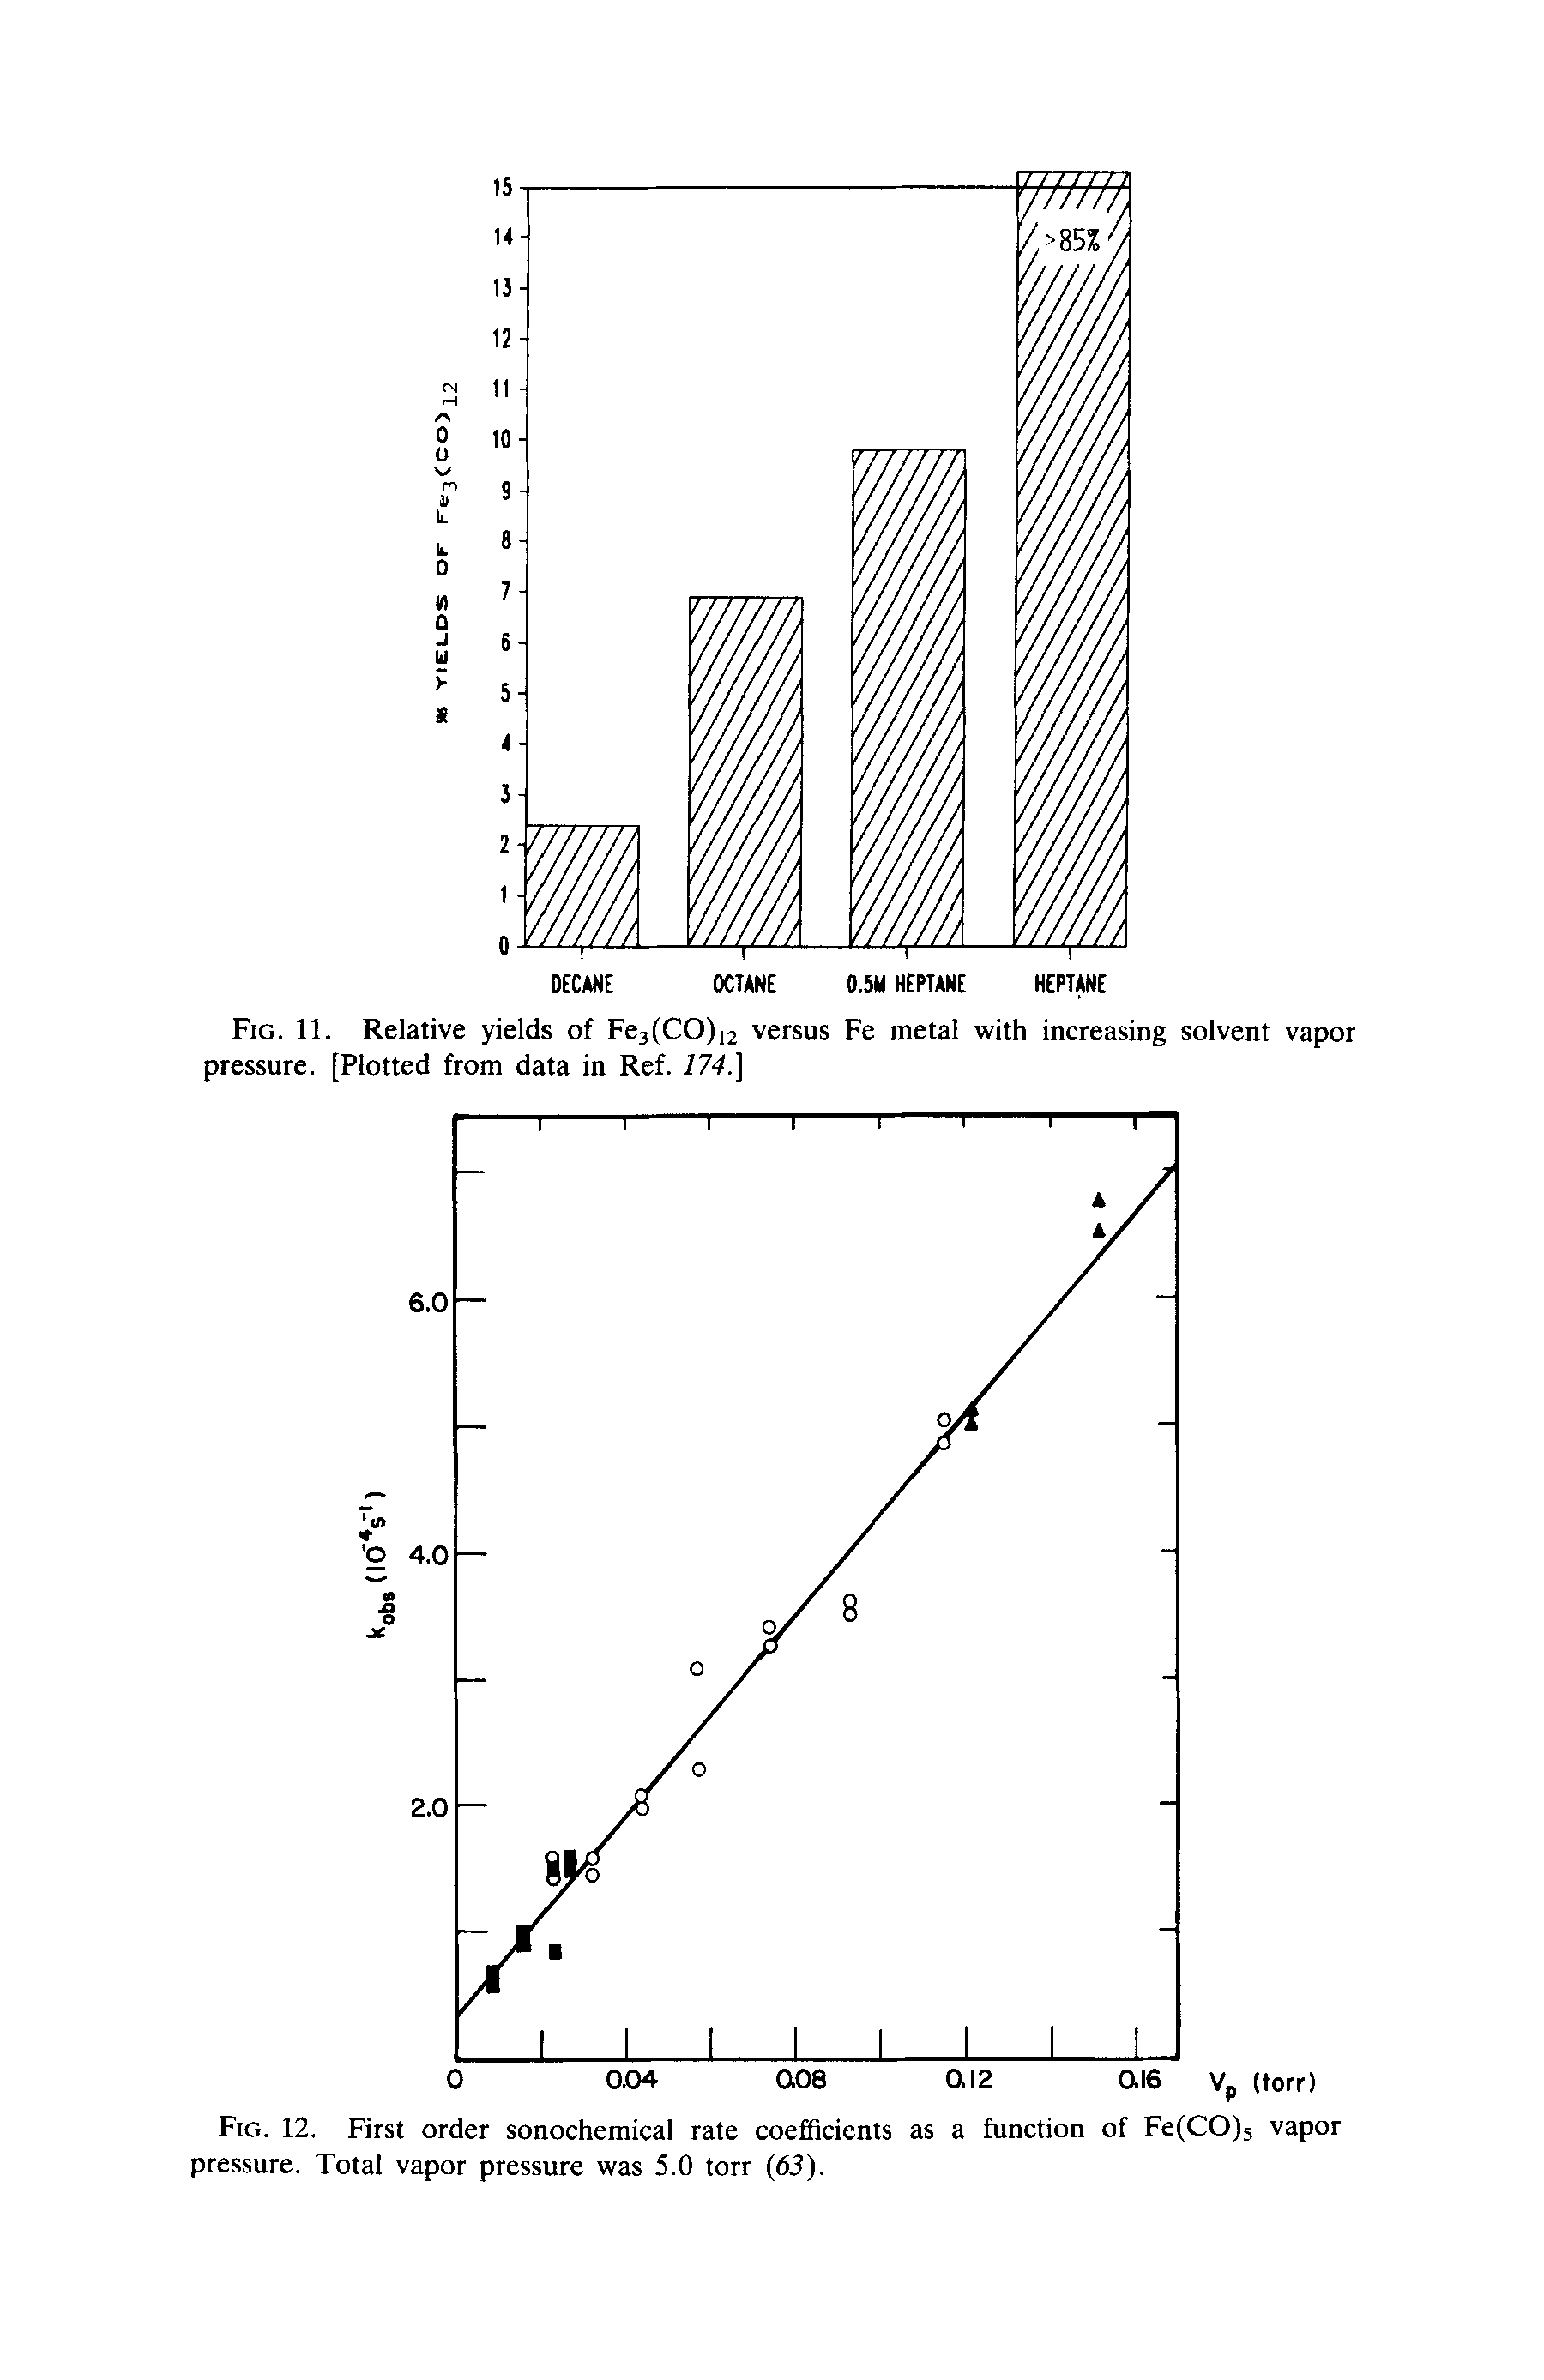 Fig. 12. First order sonochemical rate coefficients as a function of Fe(CO)5 vapor pressure. Total vapor pressure was 5.0 torr (63).